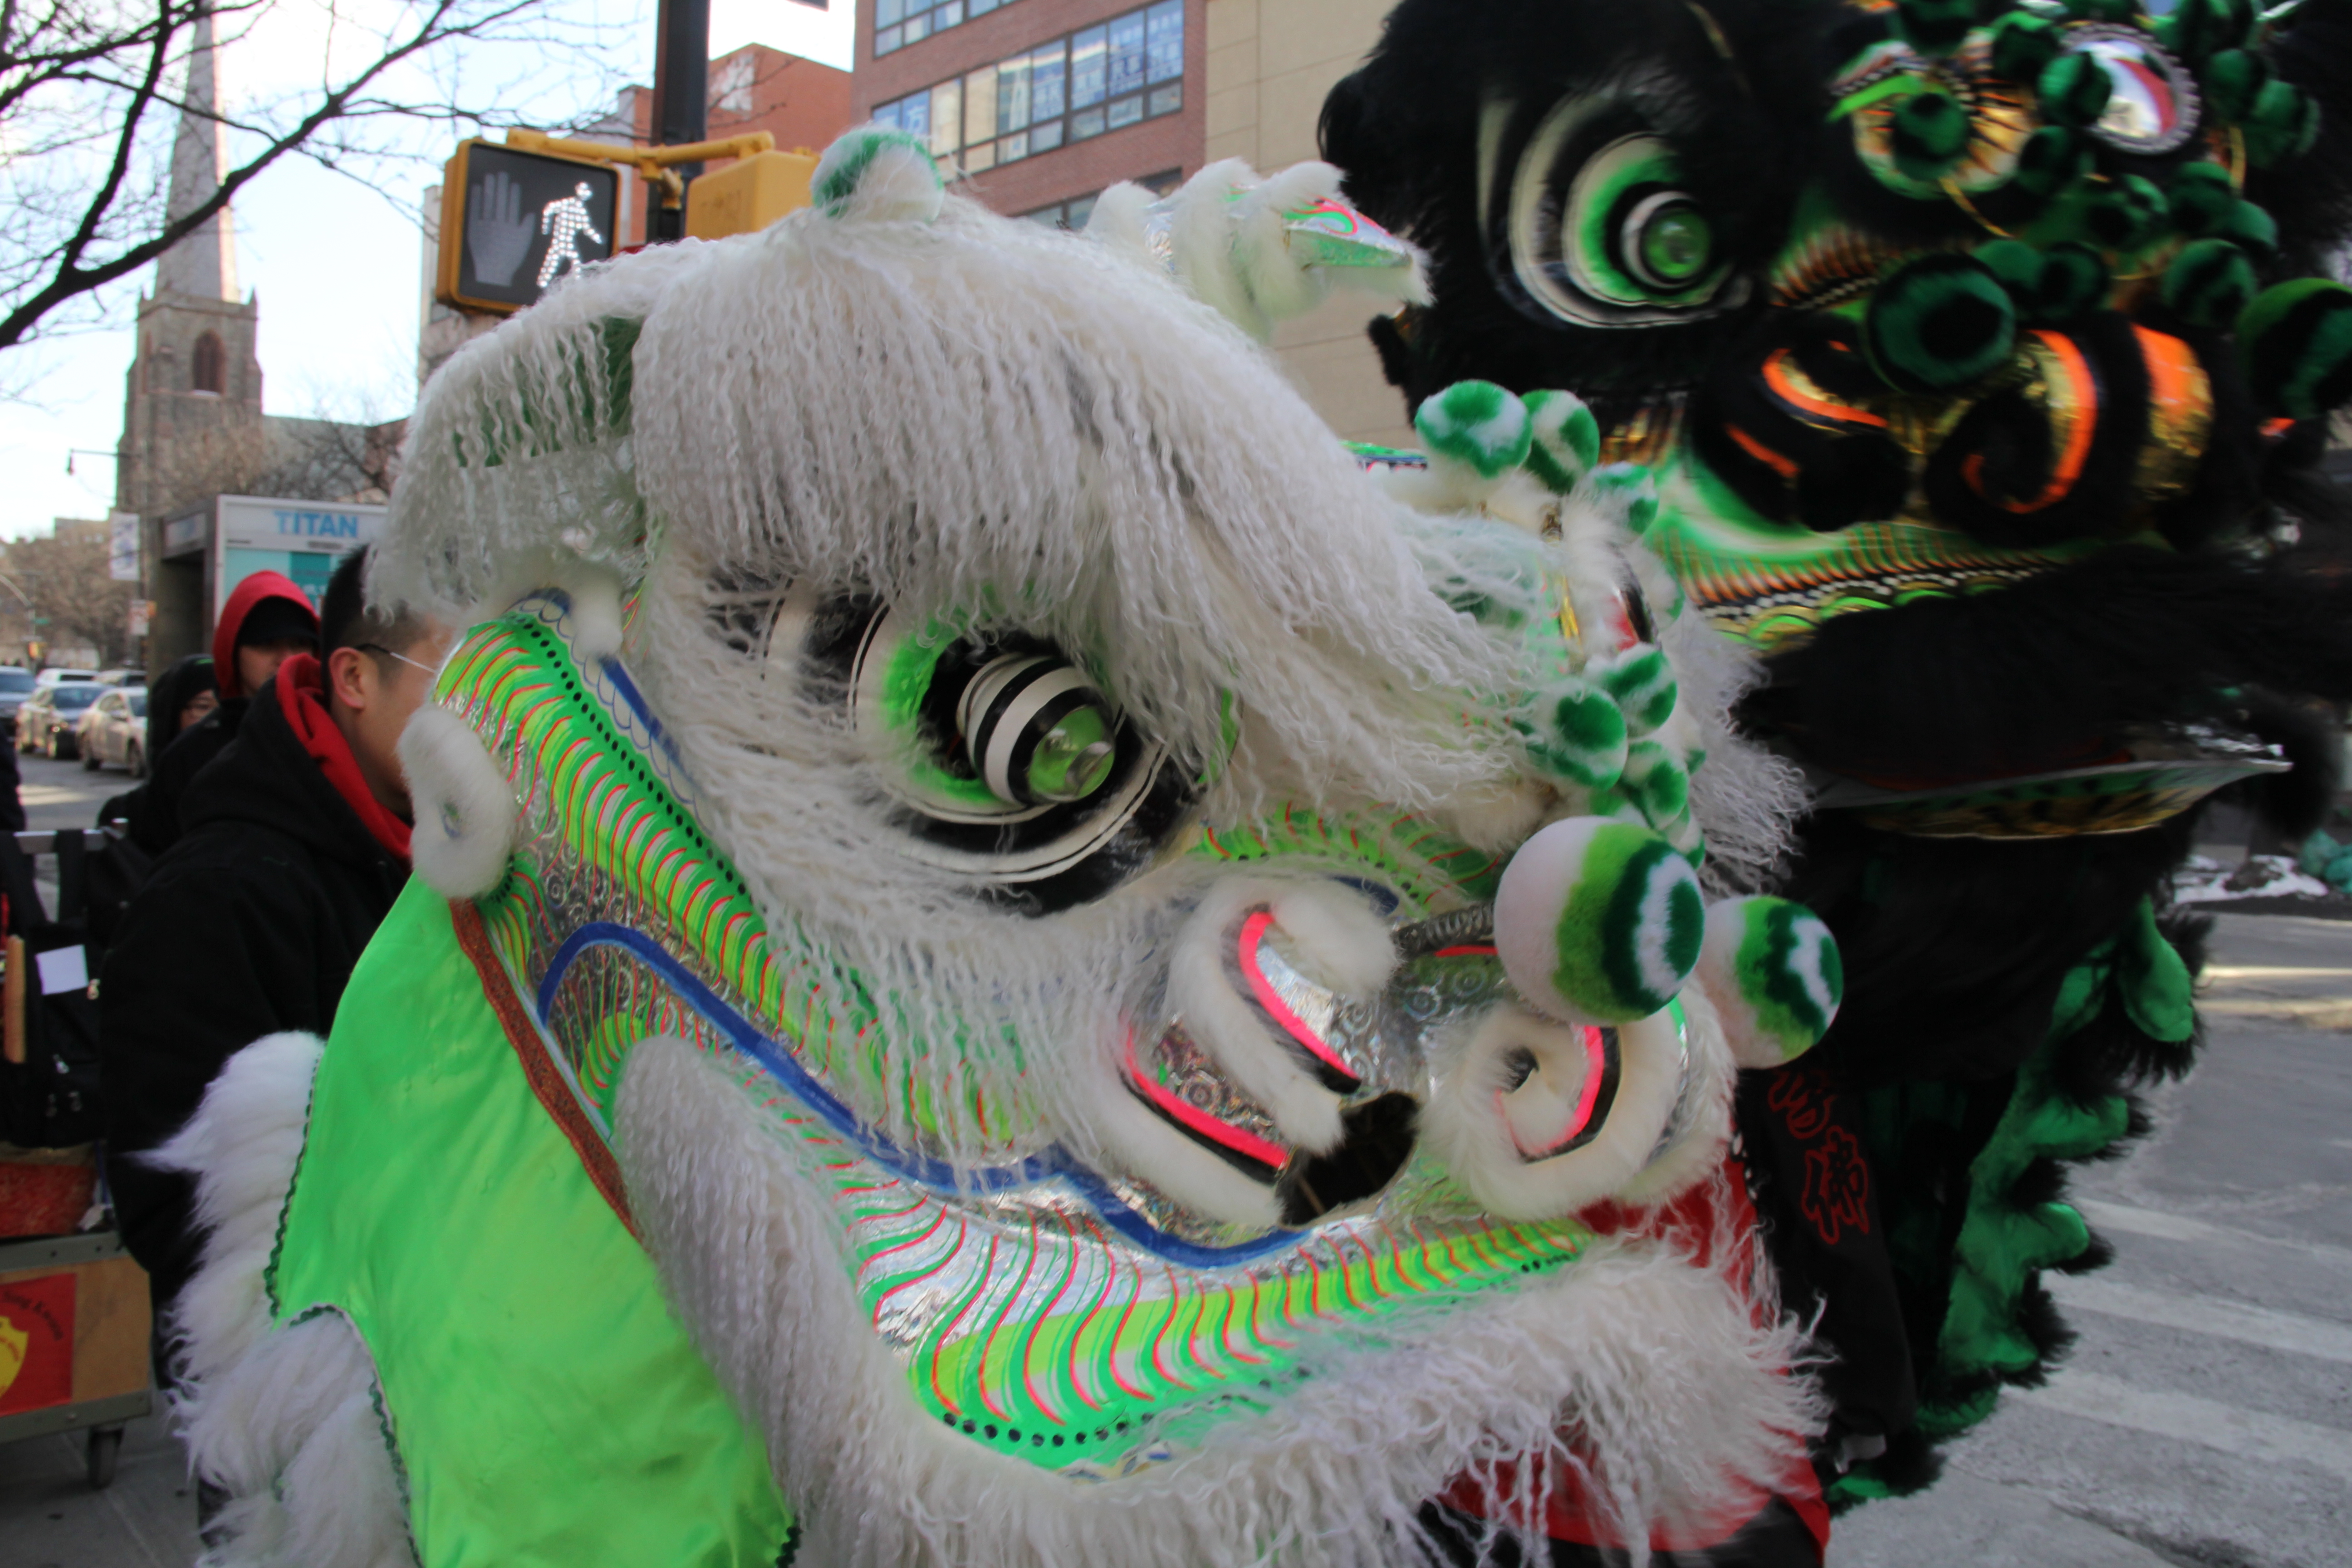 A green dragon moves through the streets of Flushing.